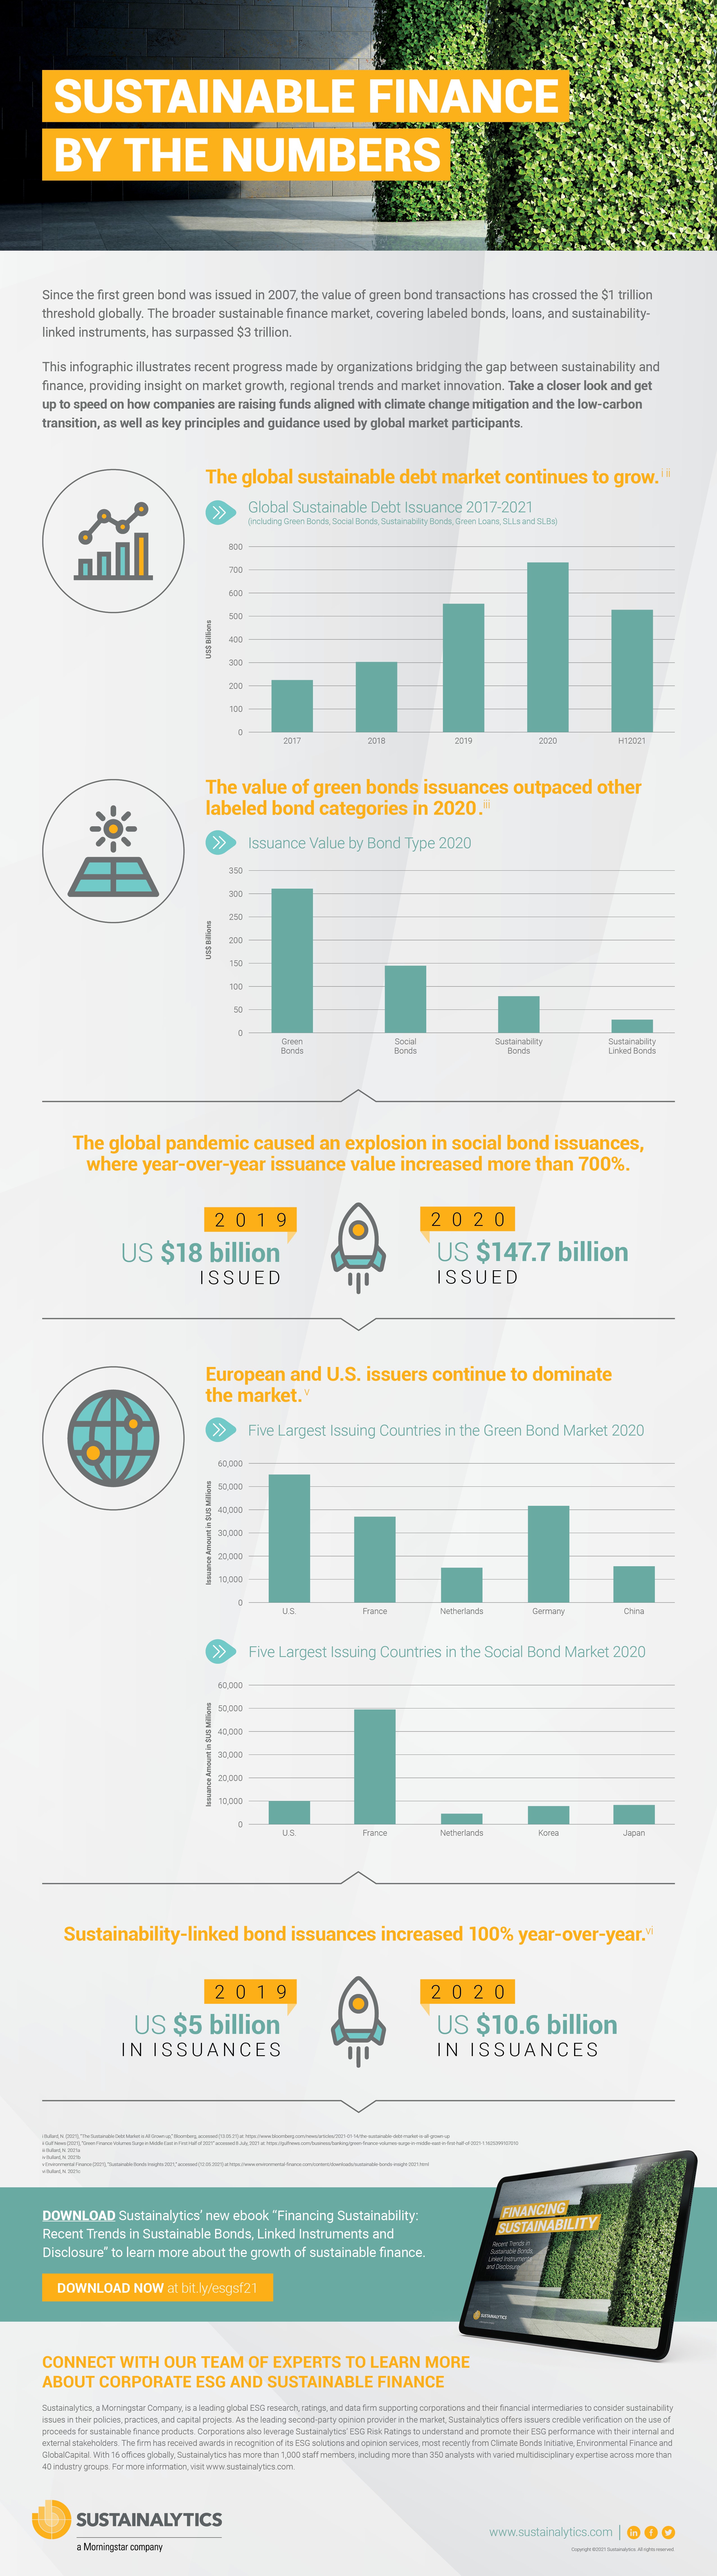 Infographic_Sustainable Finance by the Numbers